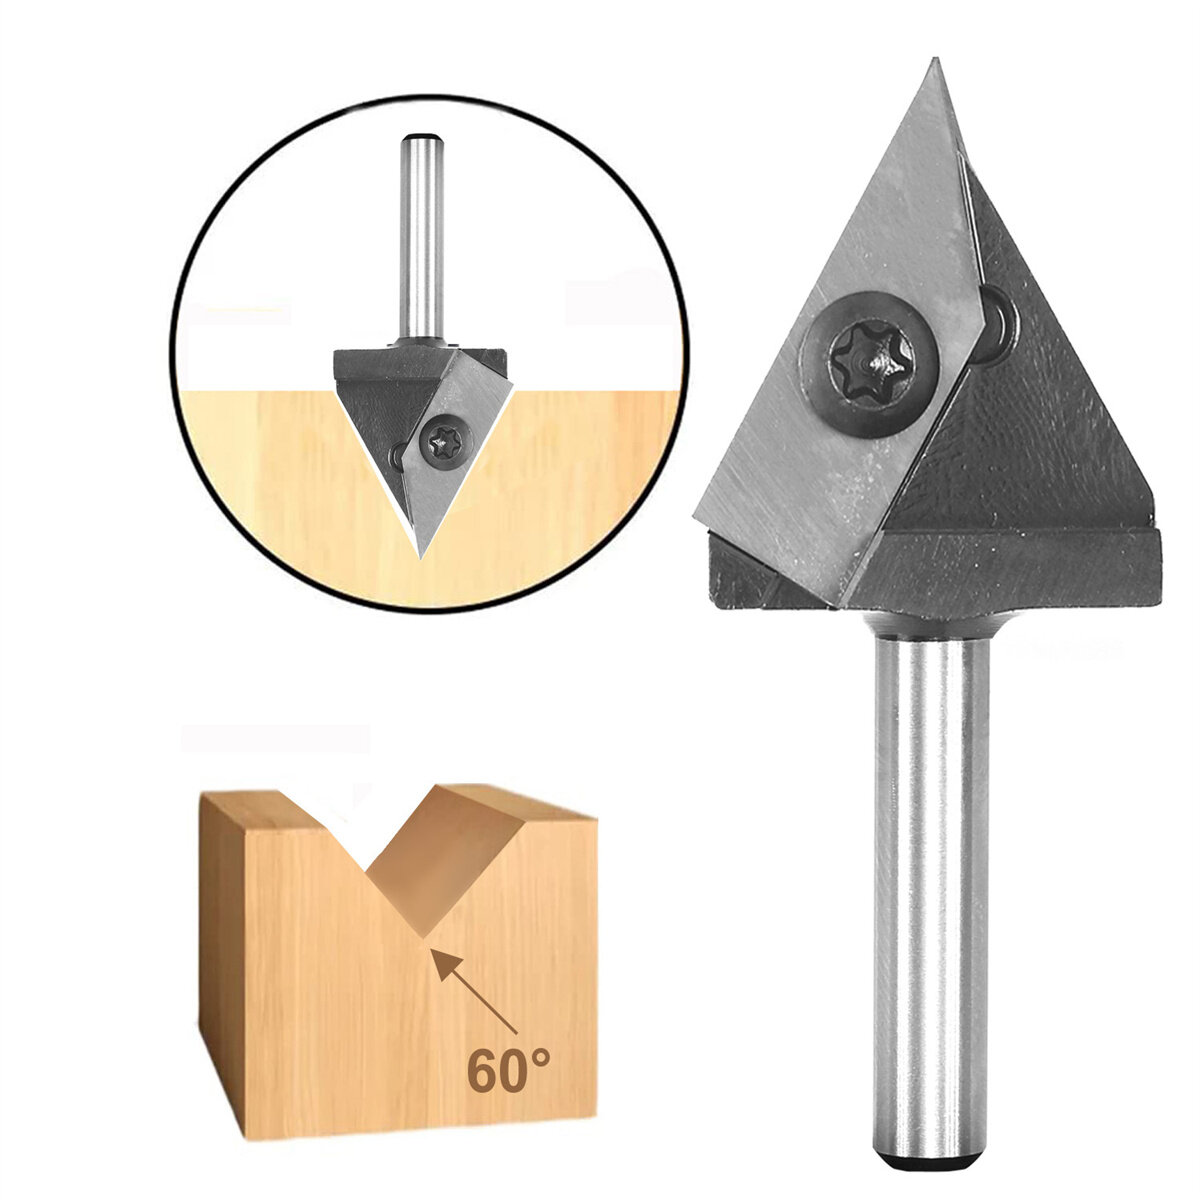 

1/2 Inch 1/4 Inch 6mm 12mm Shank 60 Degree V-Groove Carbide Insert Wood CNC Router Bits Milling Cutter for Woodworking E